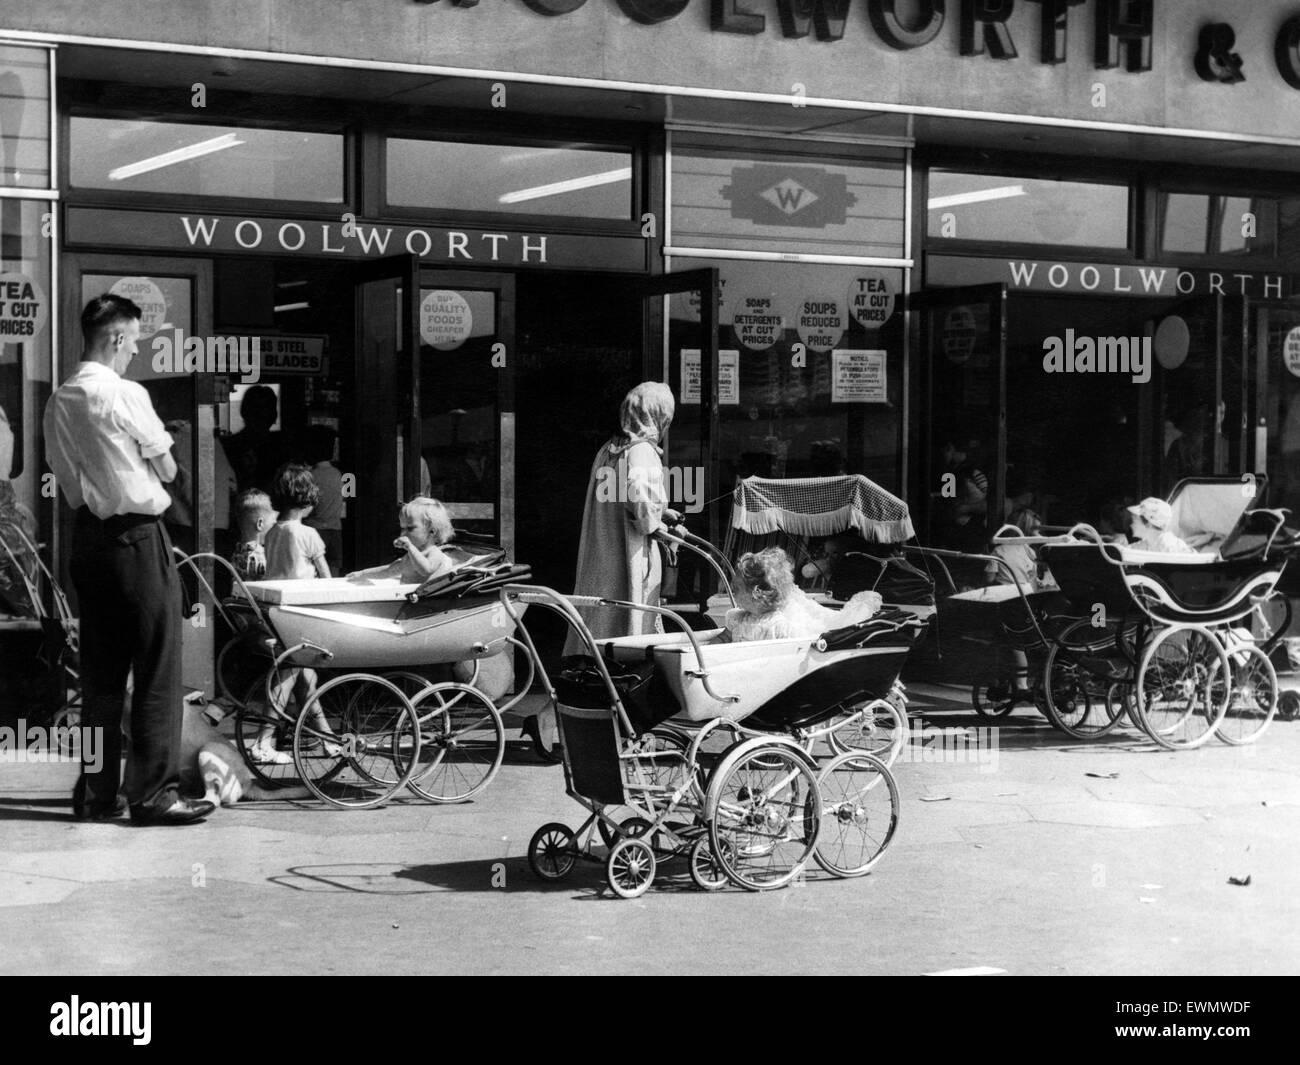 Woolworths 1960s Stock Photos & Woolworths 1960s Stock Images - Alamy